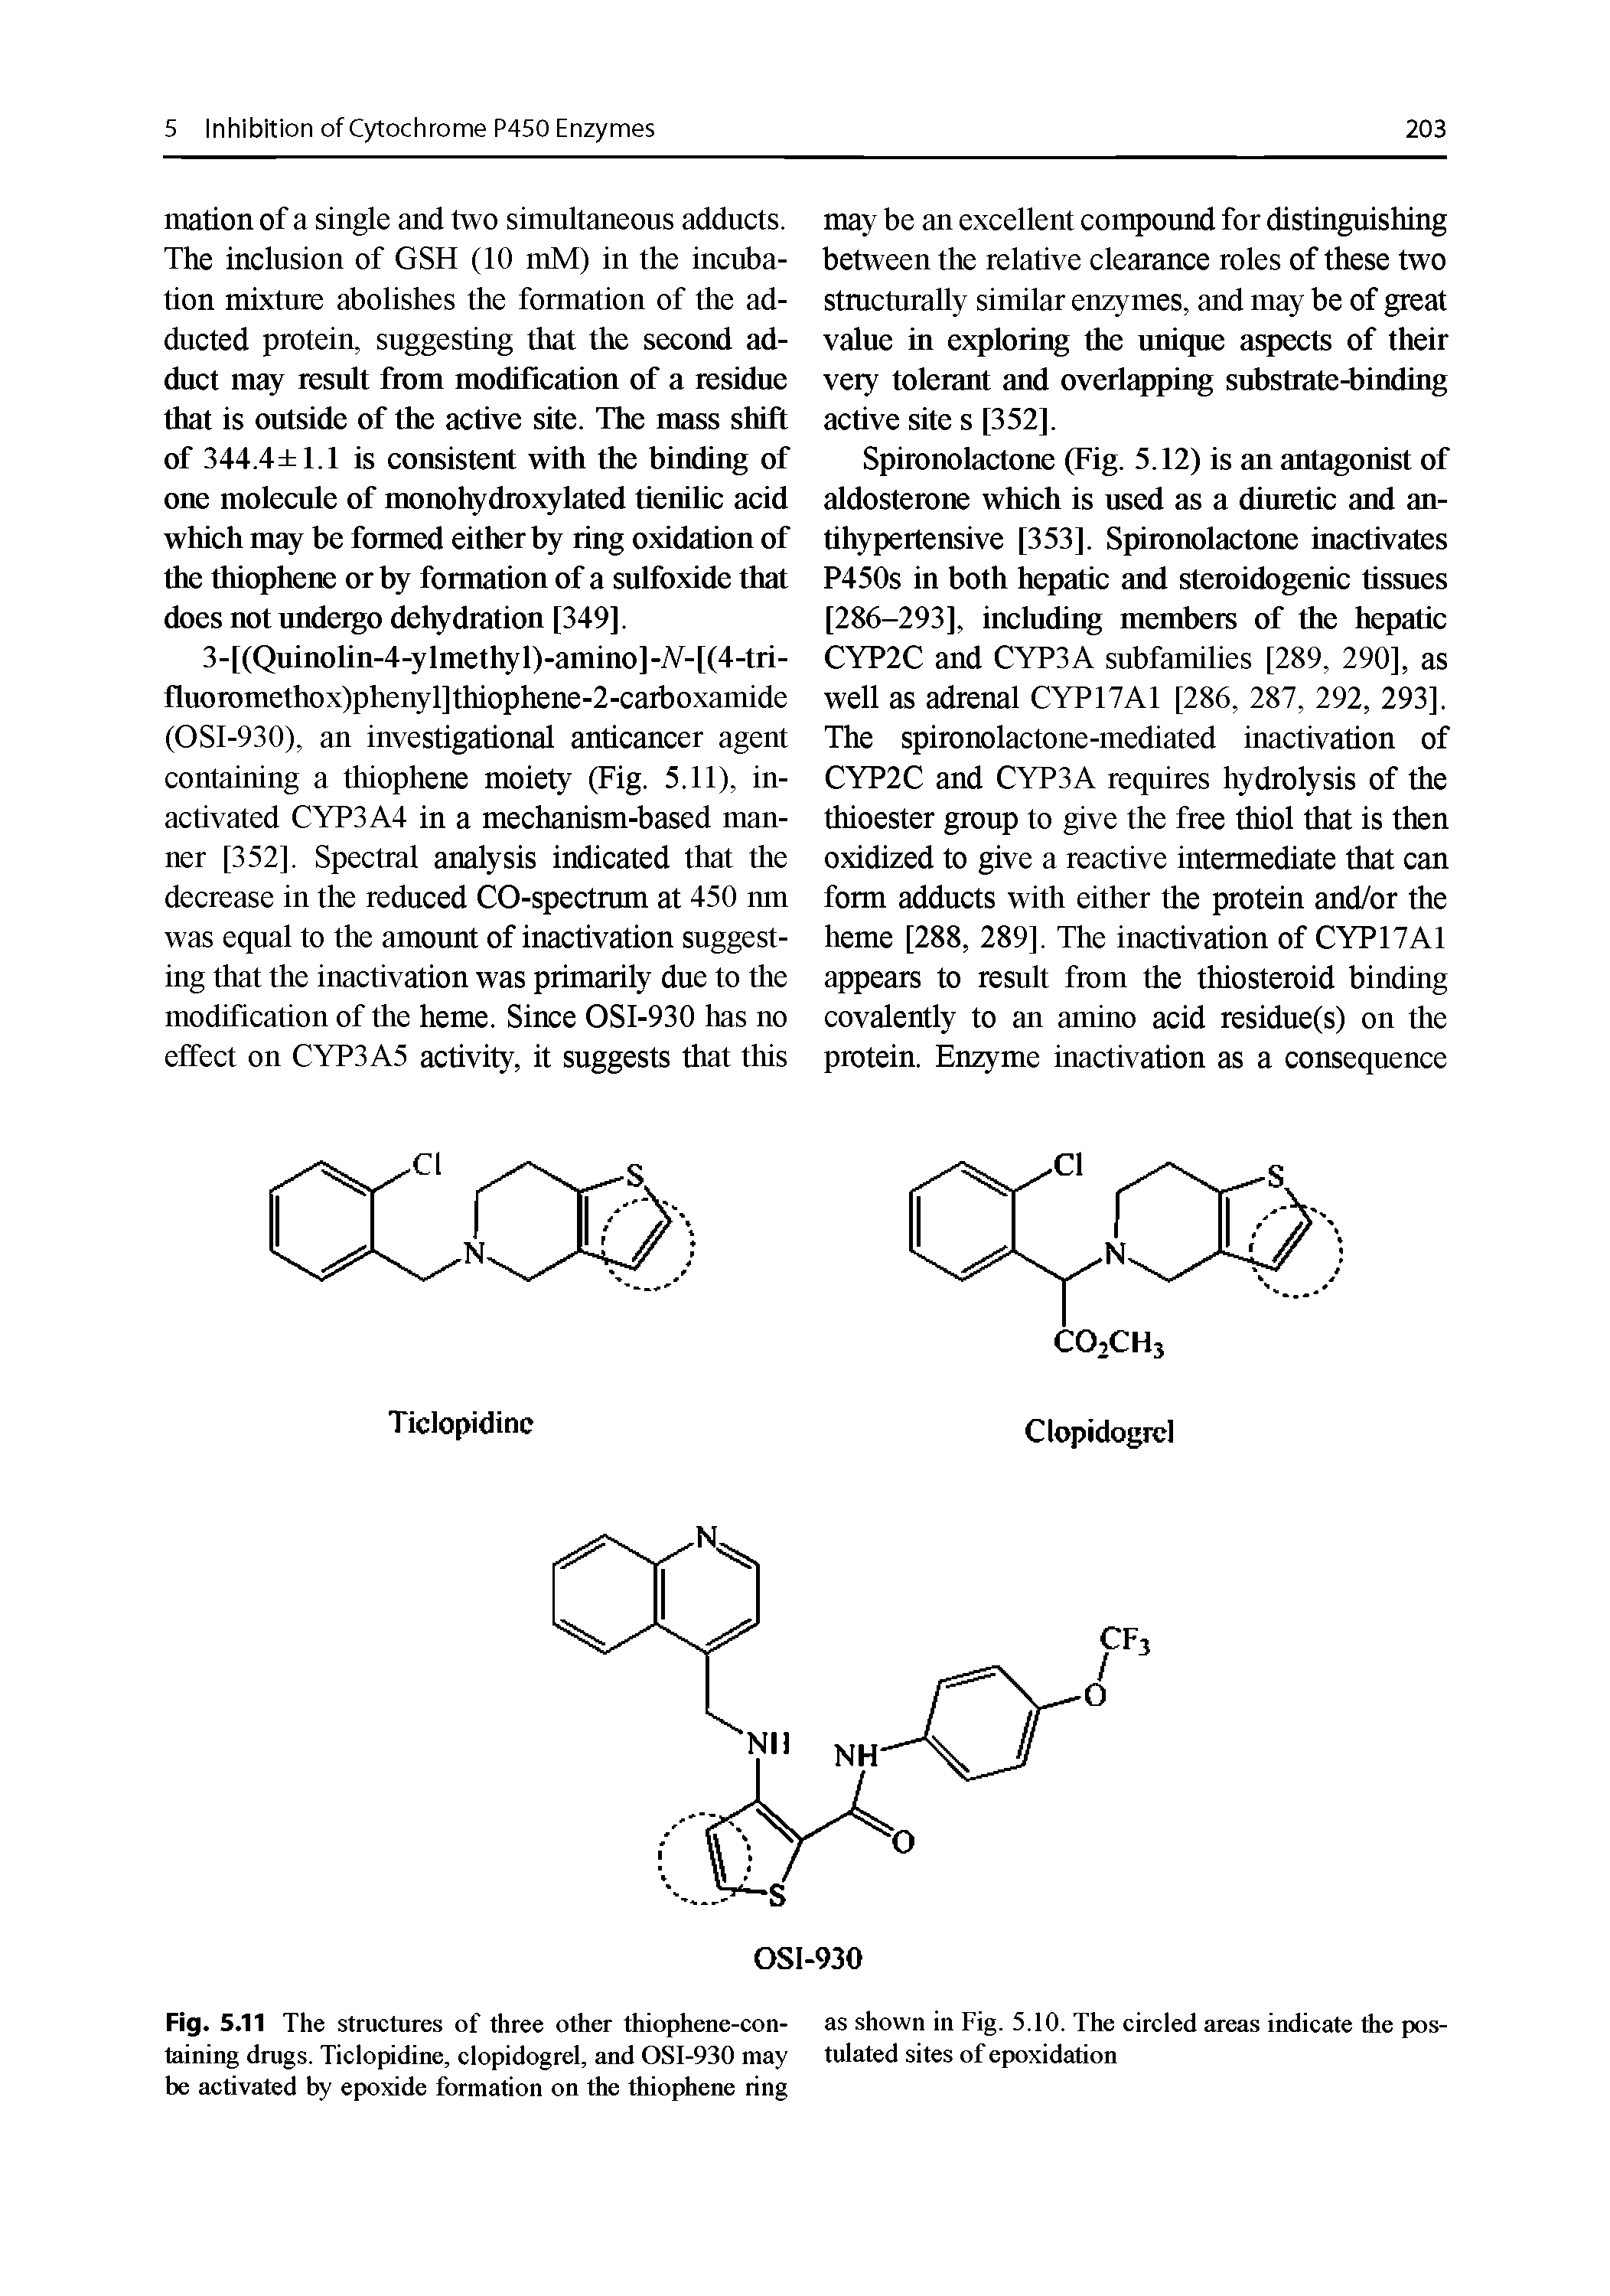 Fig. 5.11 The stractures of three other thiophene-containing drugs. Ticlopidine, clopidogrcl, and OSI-930 may be activated by epoxide formation on the thiophene ring...